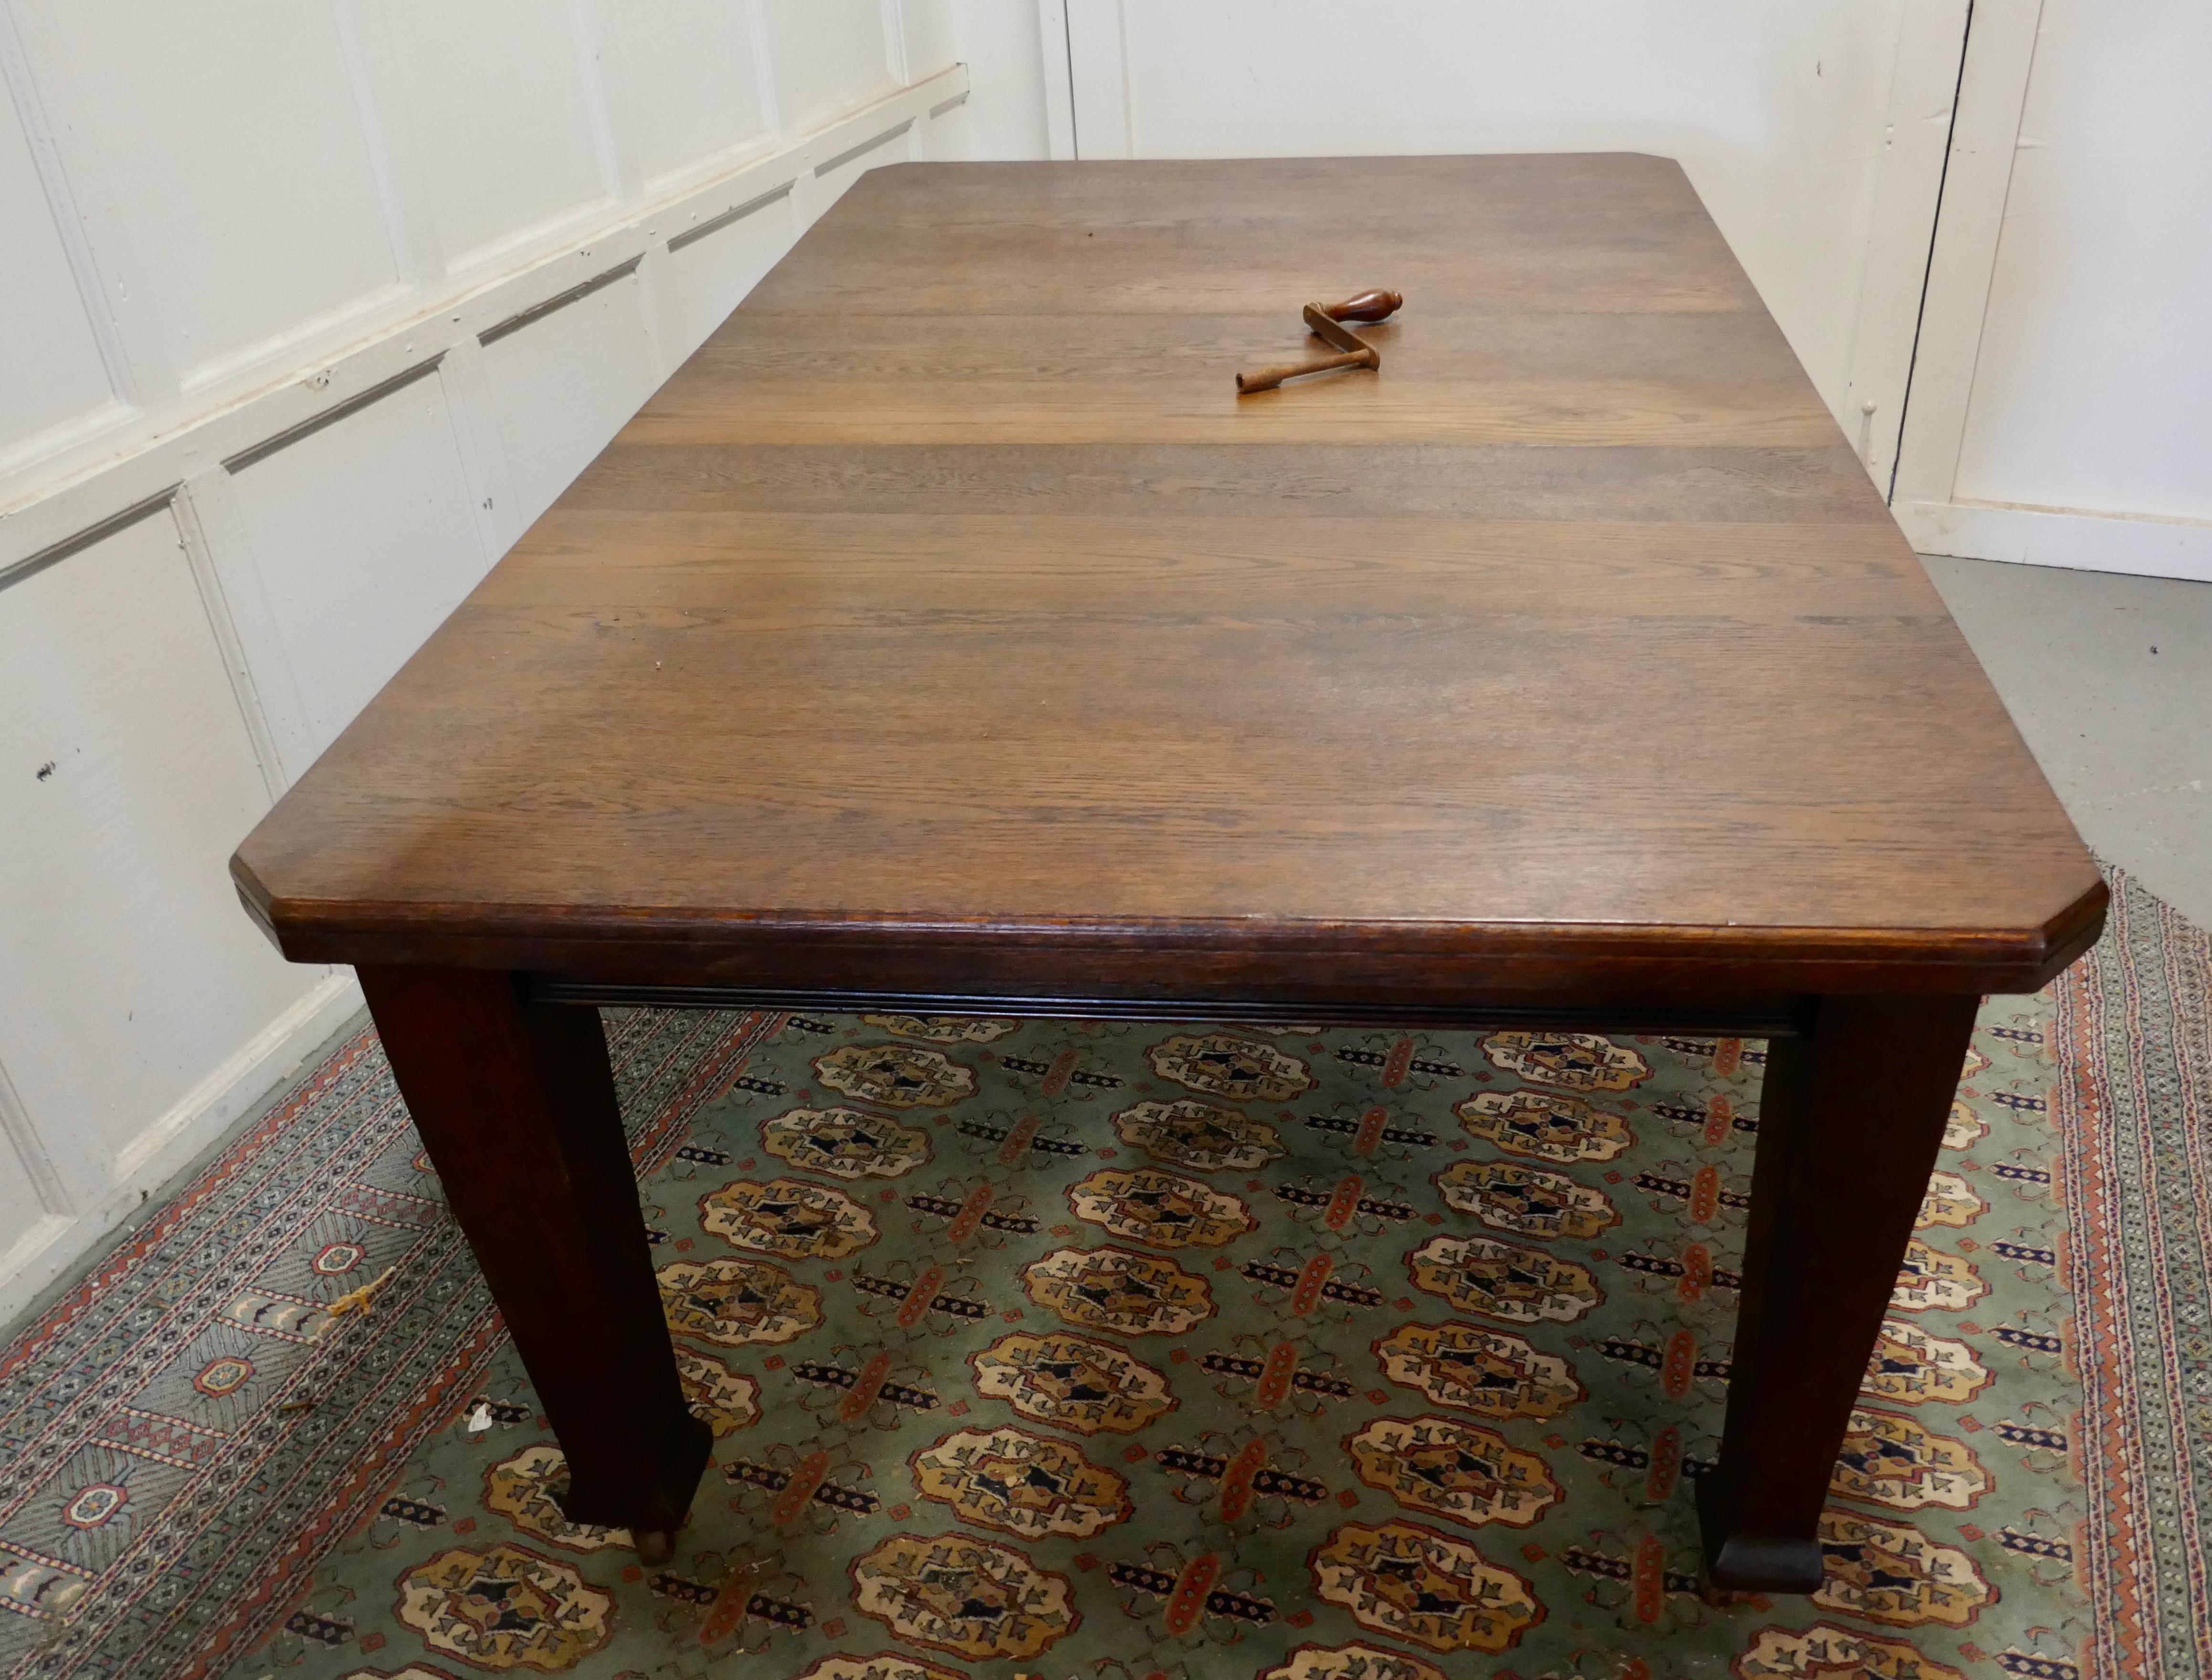 Victorian arts and crafts oak wind out table, extending dining table.